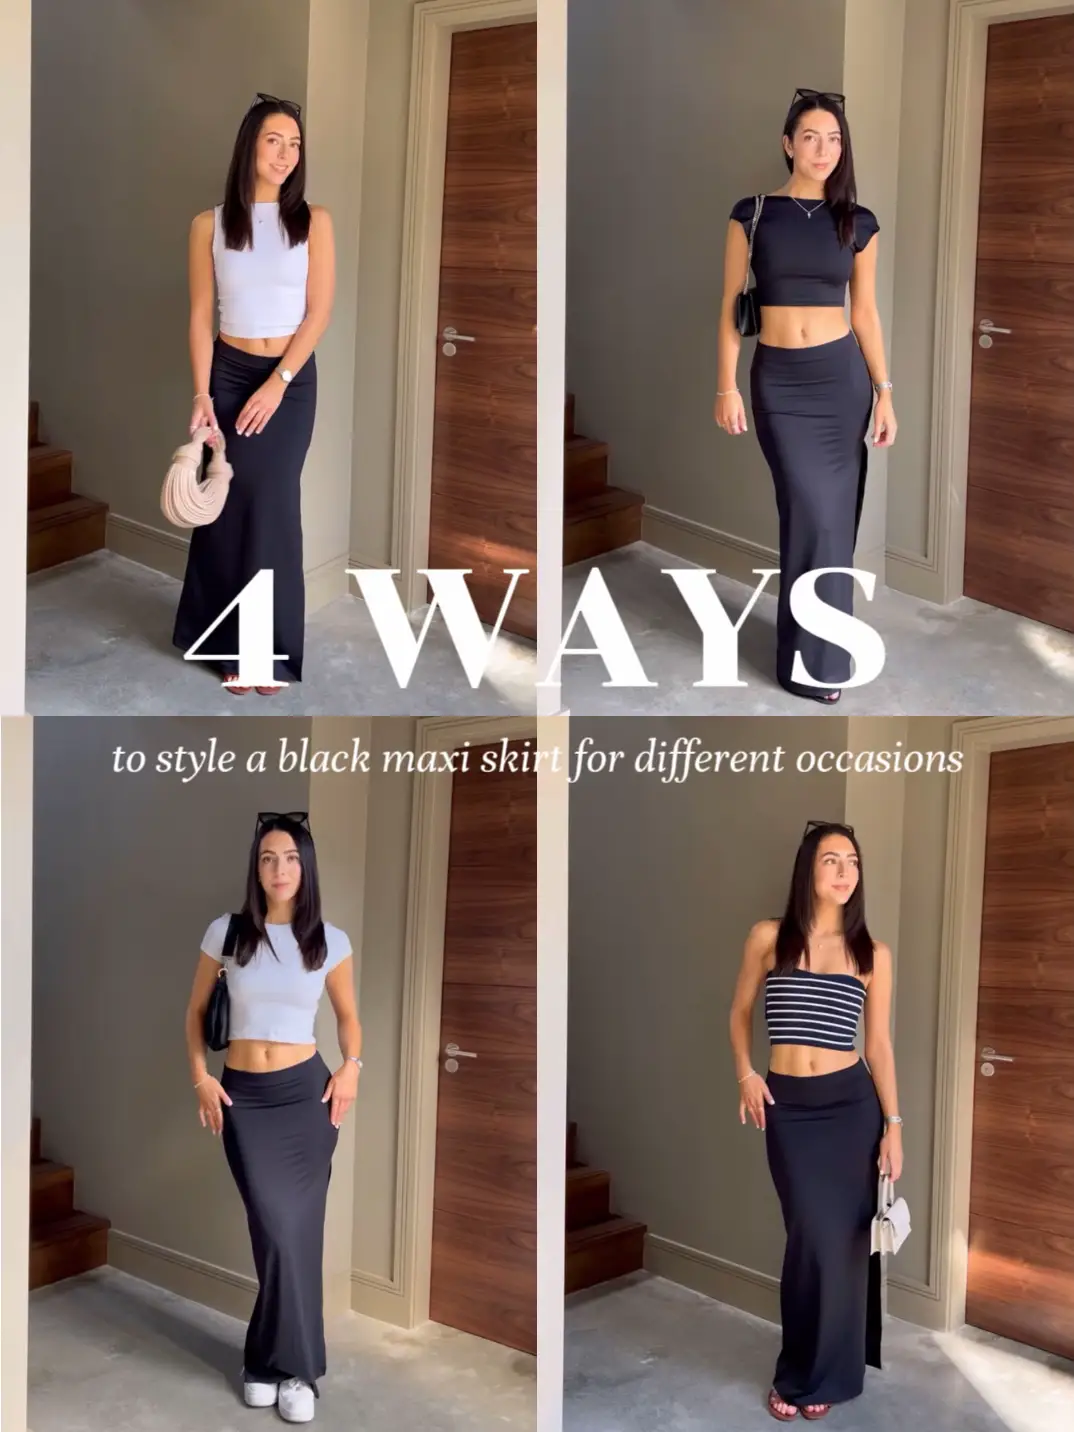 19 Black Skirt Outfits: How to Style a Black Skirt